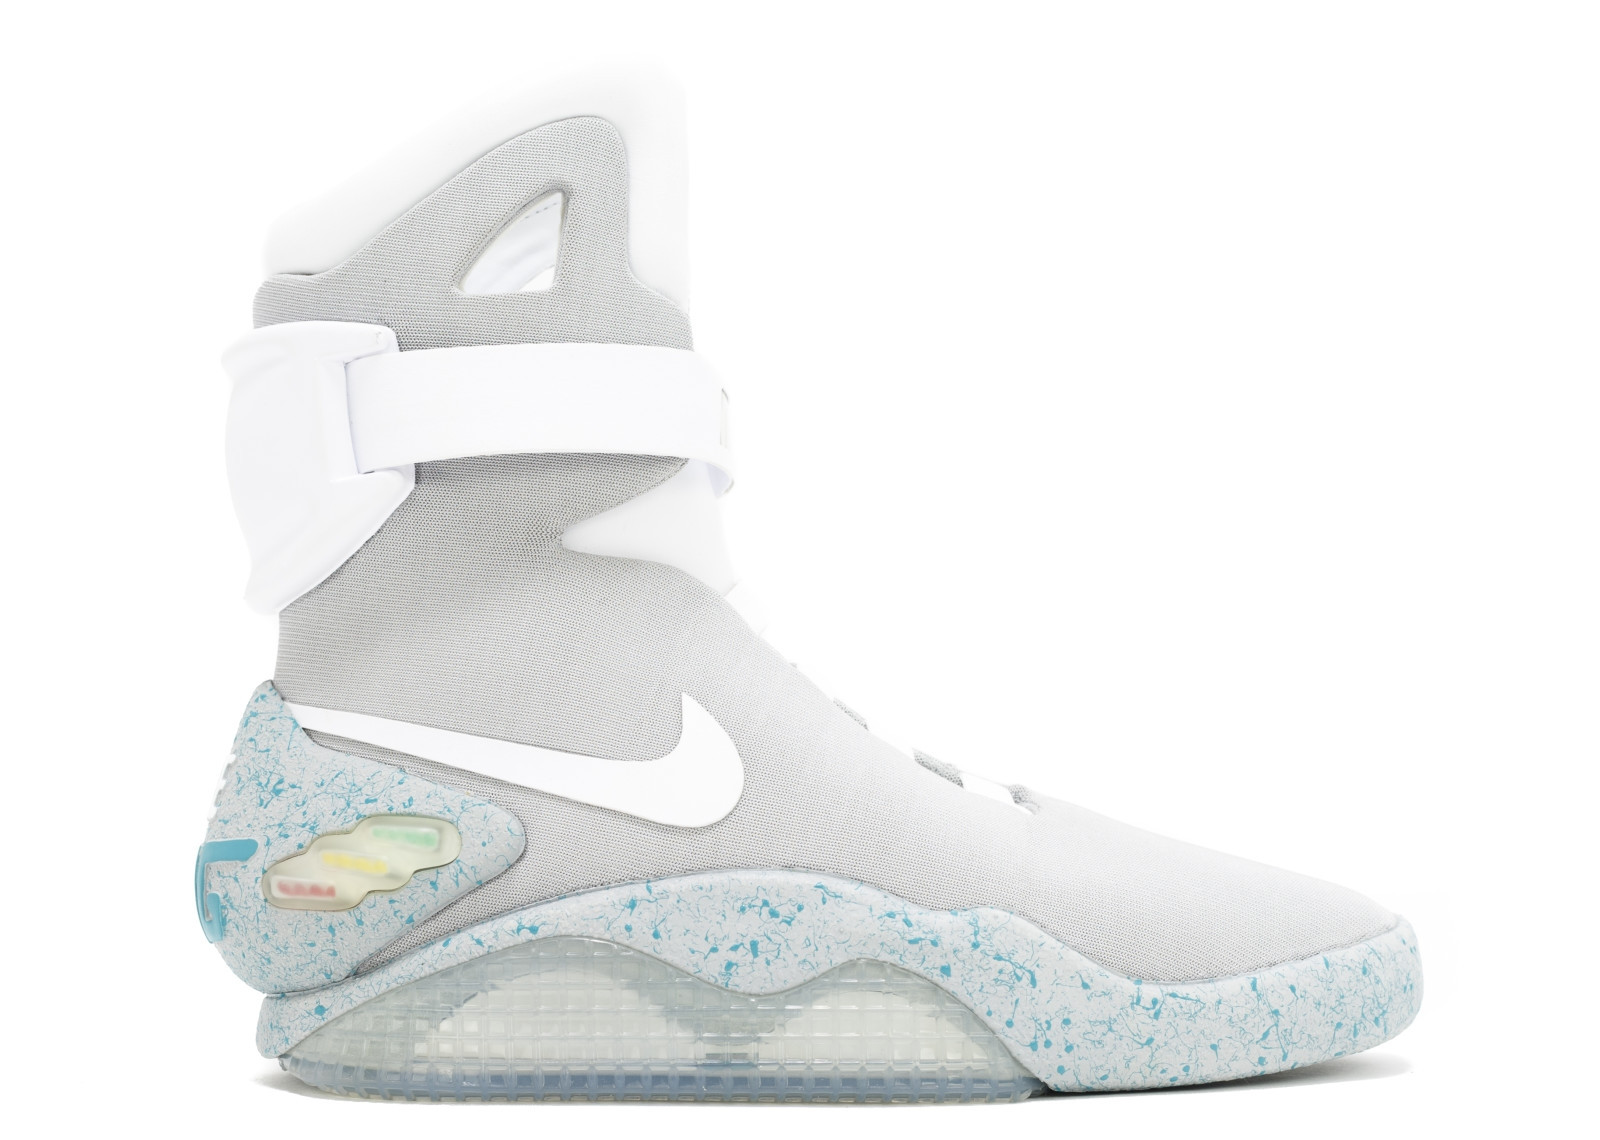 Air Mag "Back To The Future"